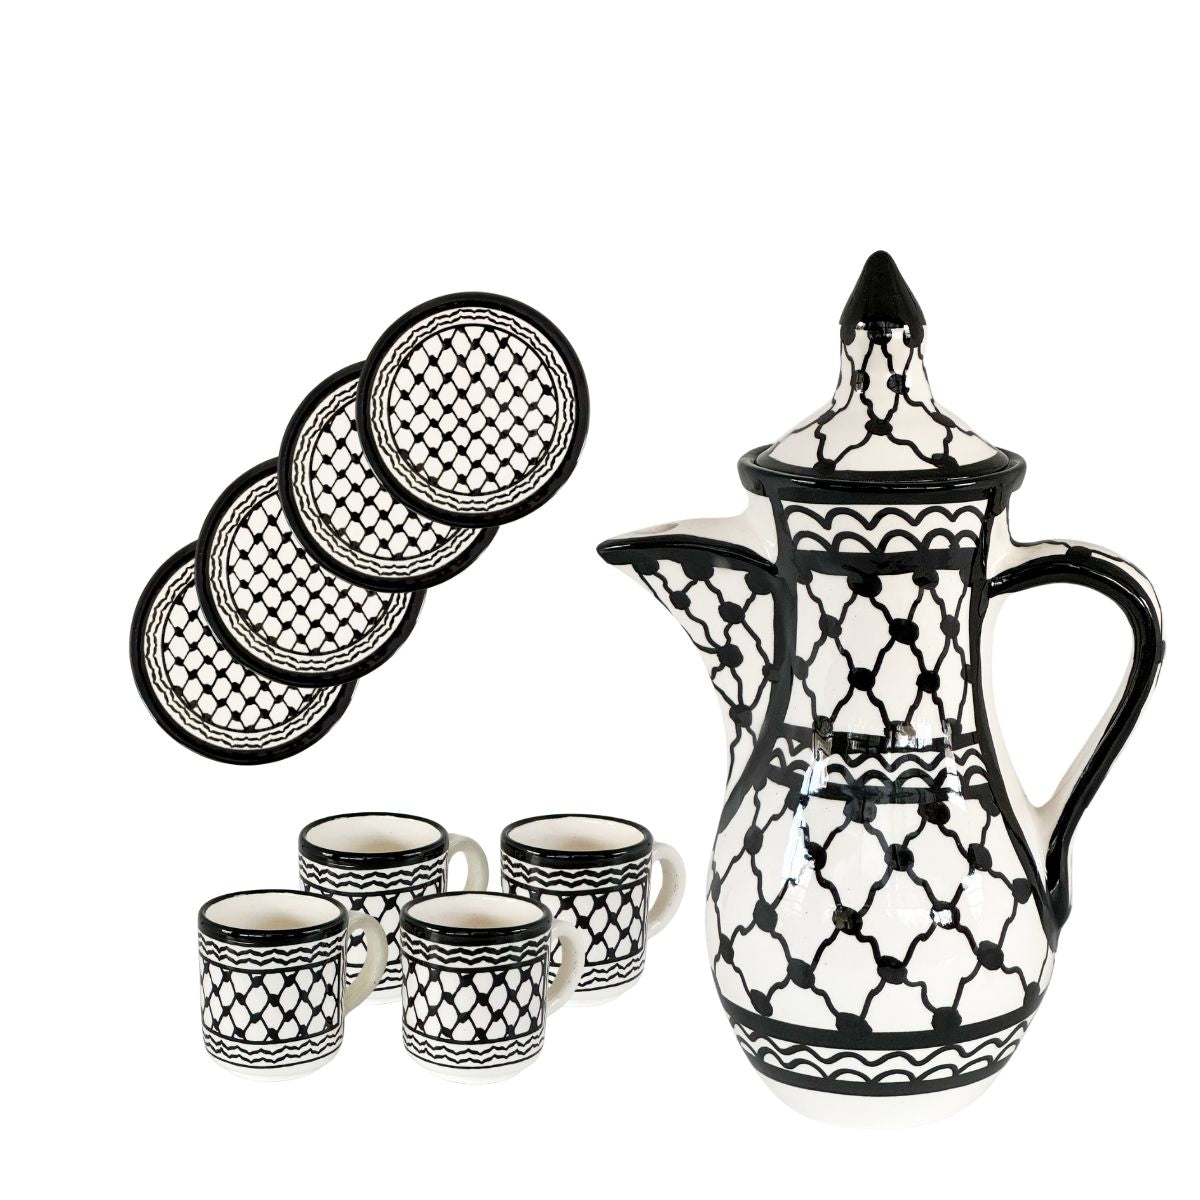 Ceramic Coffee Server Gift Set with Cups and Plates